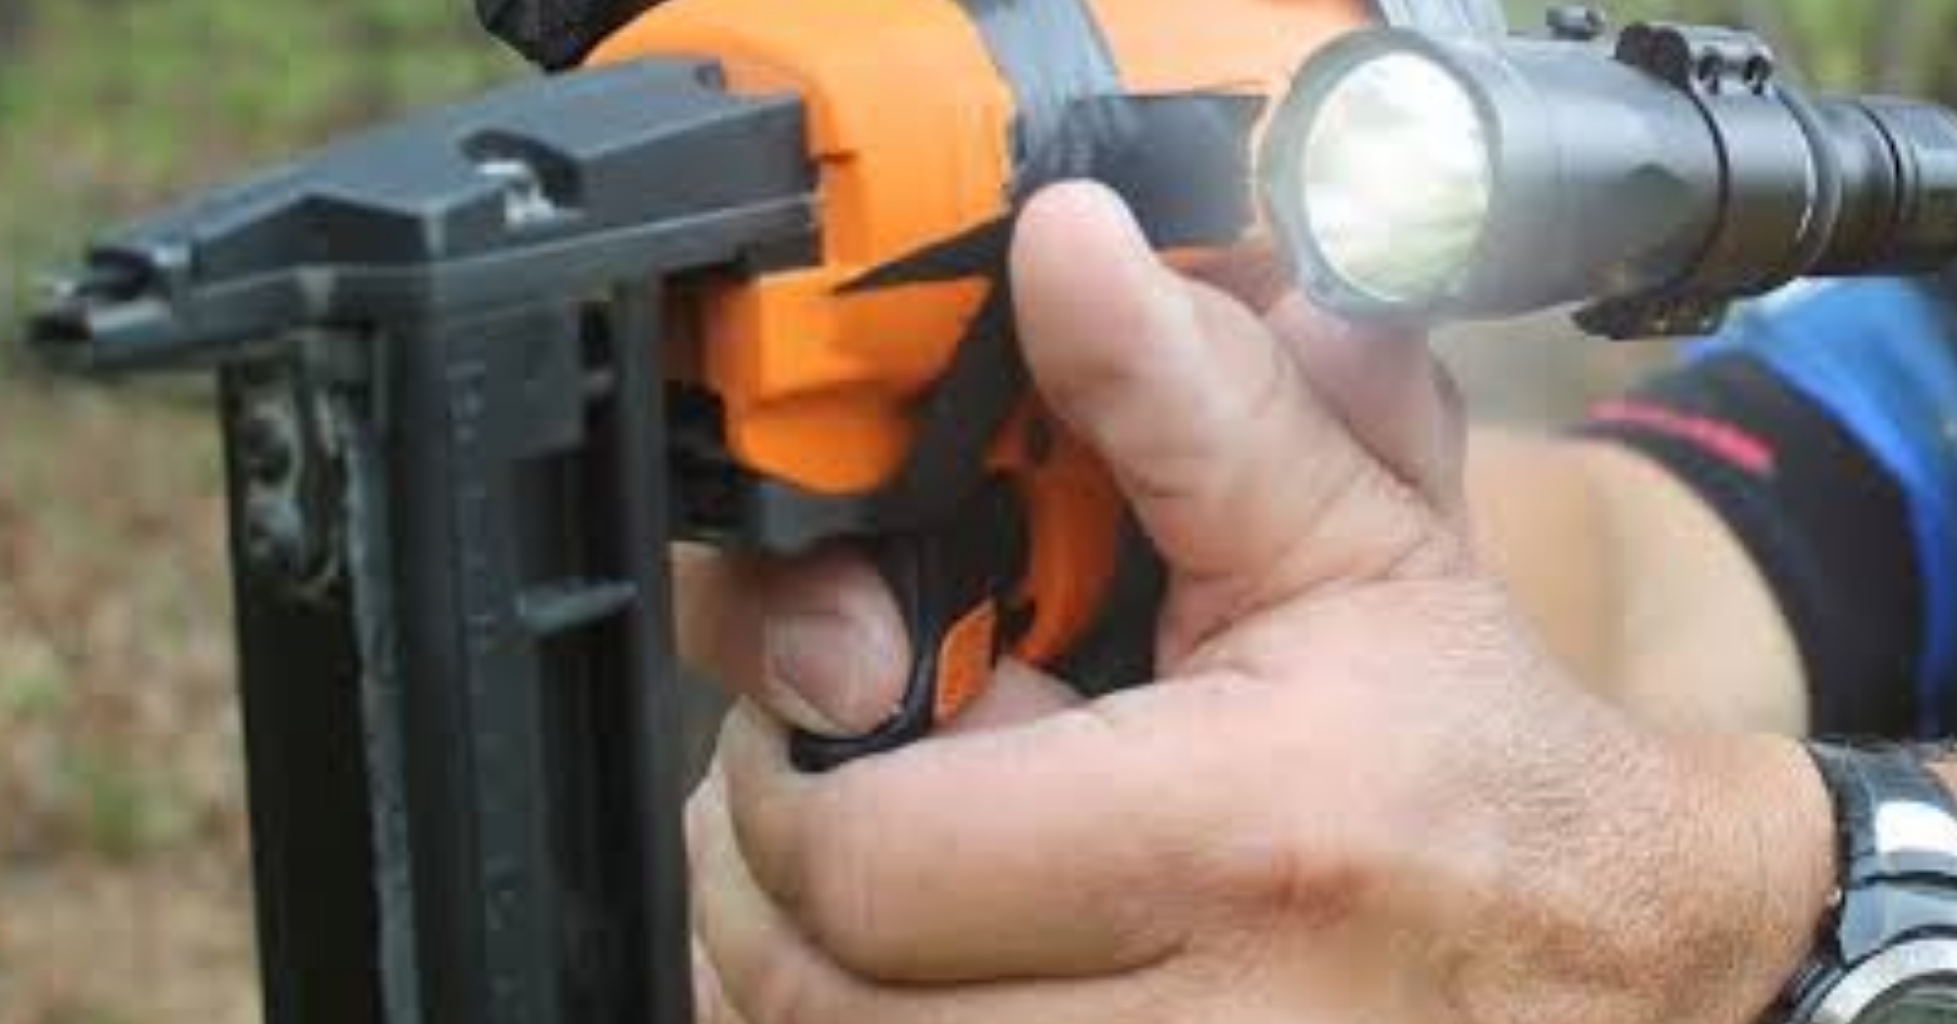 You are currently viewing ALLEGED NAIL GUN SHOOTING DURING ROAD RAGE INCIDENT NEAR CESSNOCK